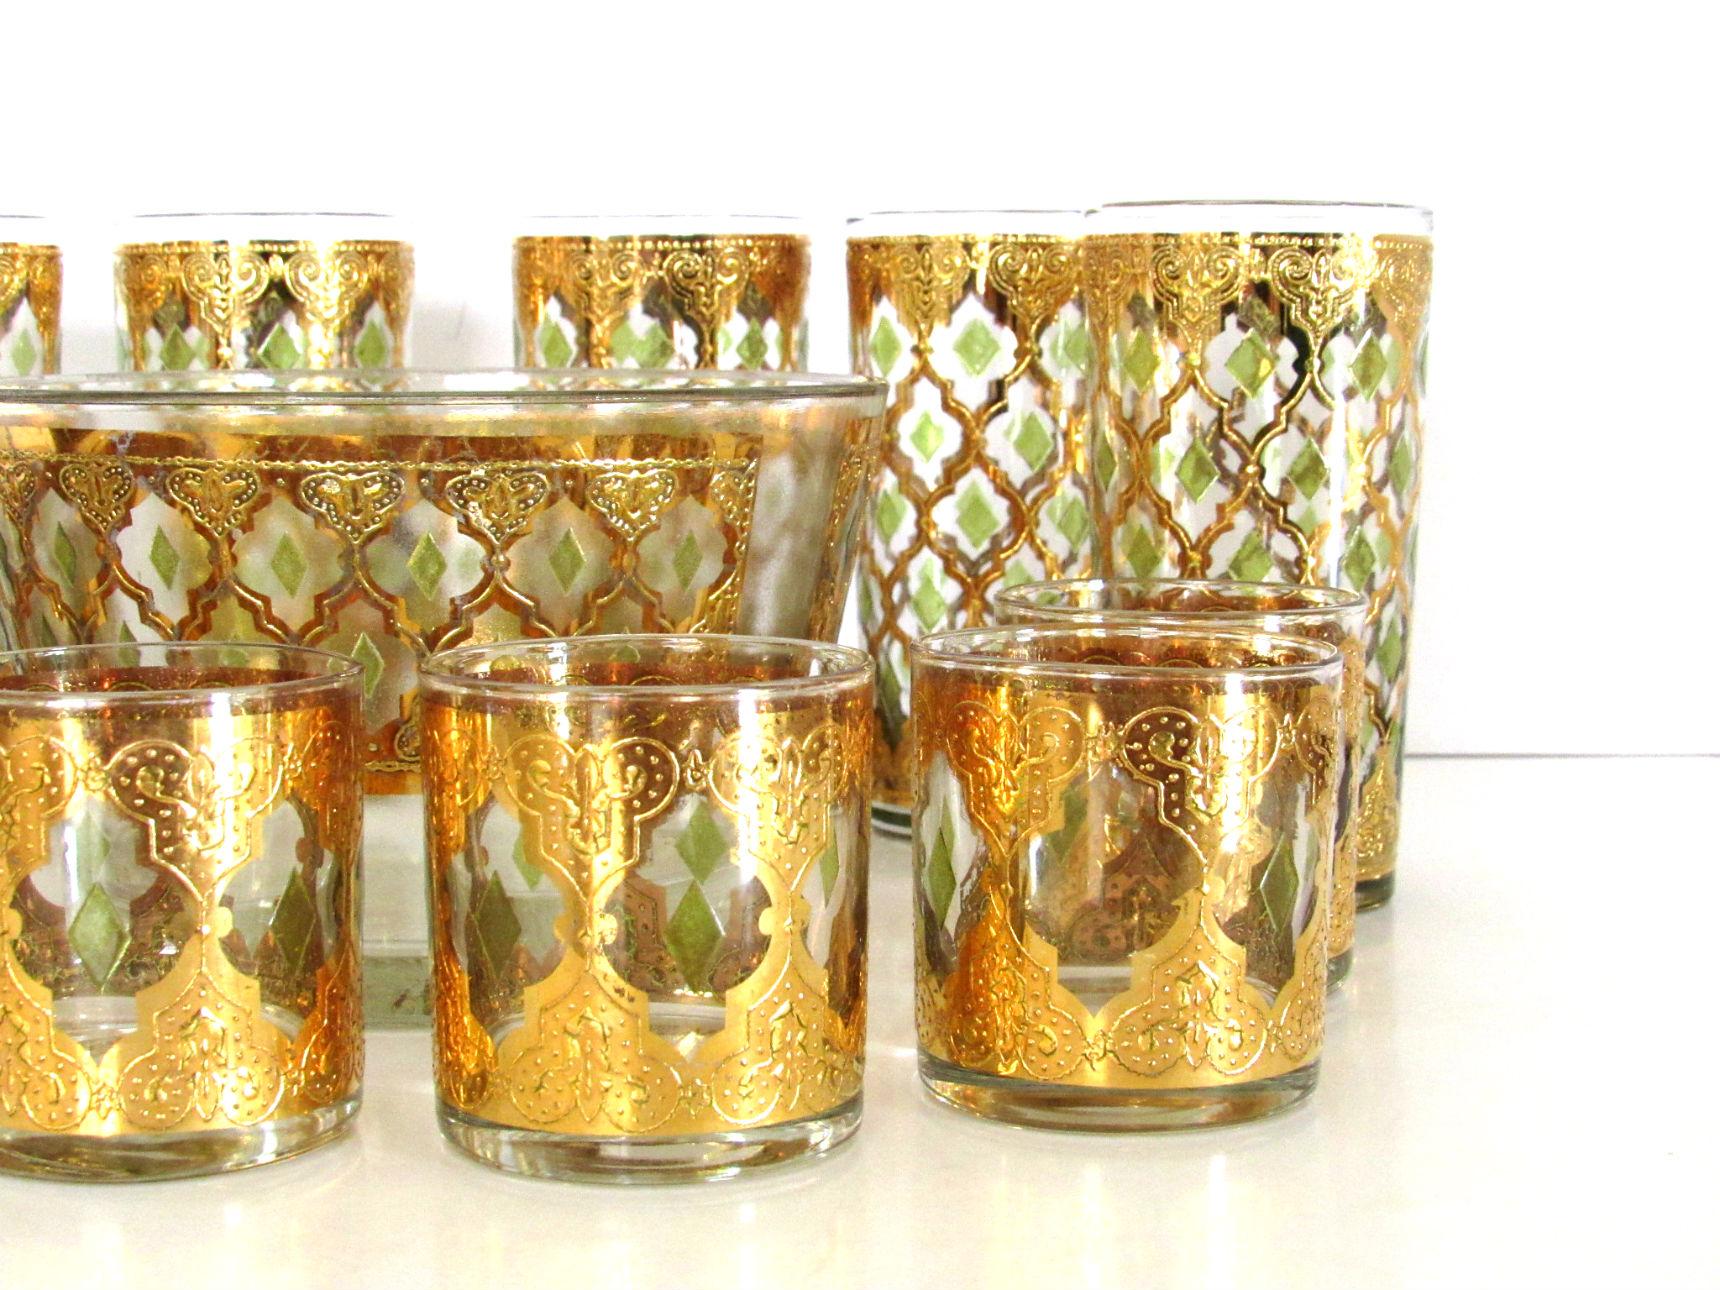 American Midcentury Set of 22-Karat Gold Leaf Glassware and Ice Bucket by Culver, 1960s